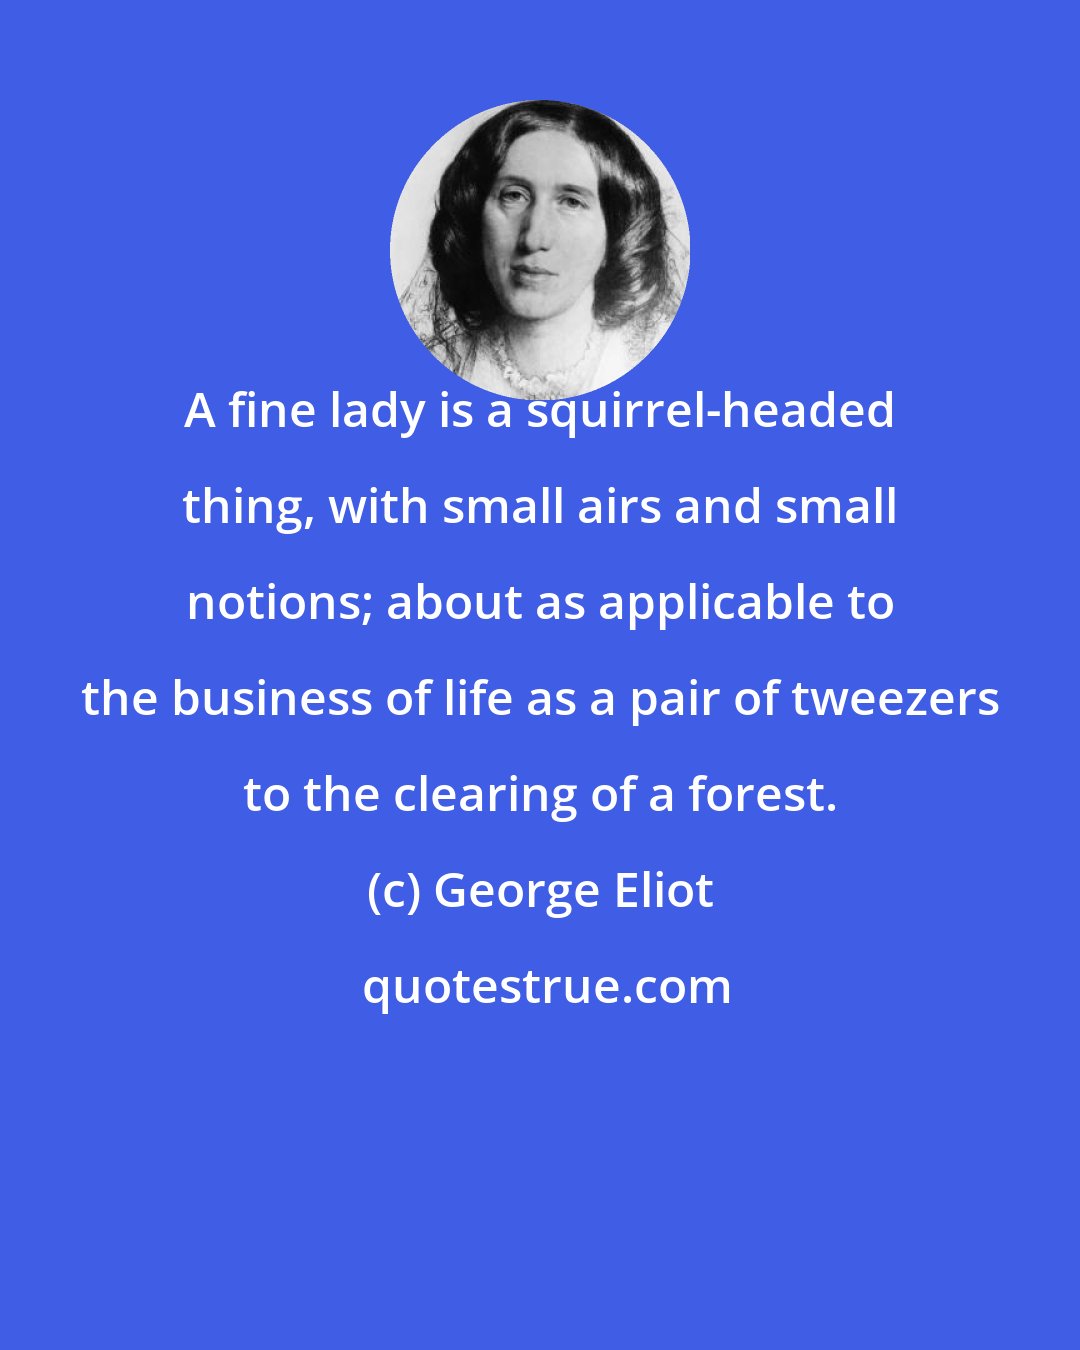 George Eliot: A fine lady is a squirrel-headed thing, with small airs and small notions; about as applicable to the business of life as a pair of tweezers to the clearing of a forest.